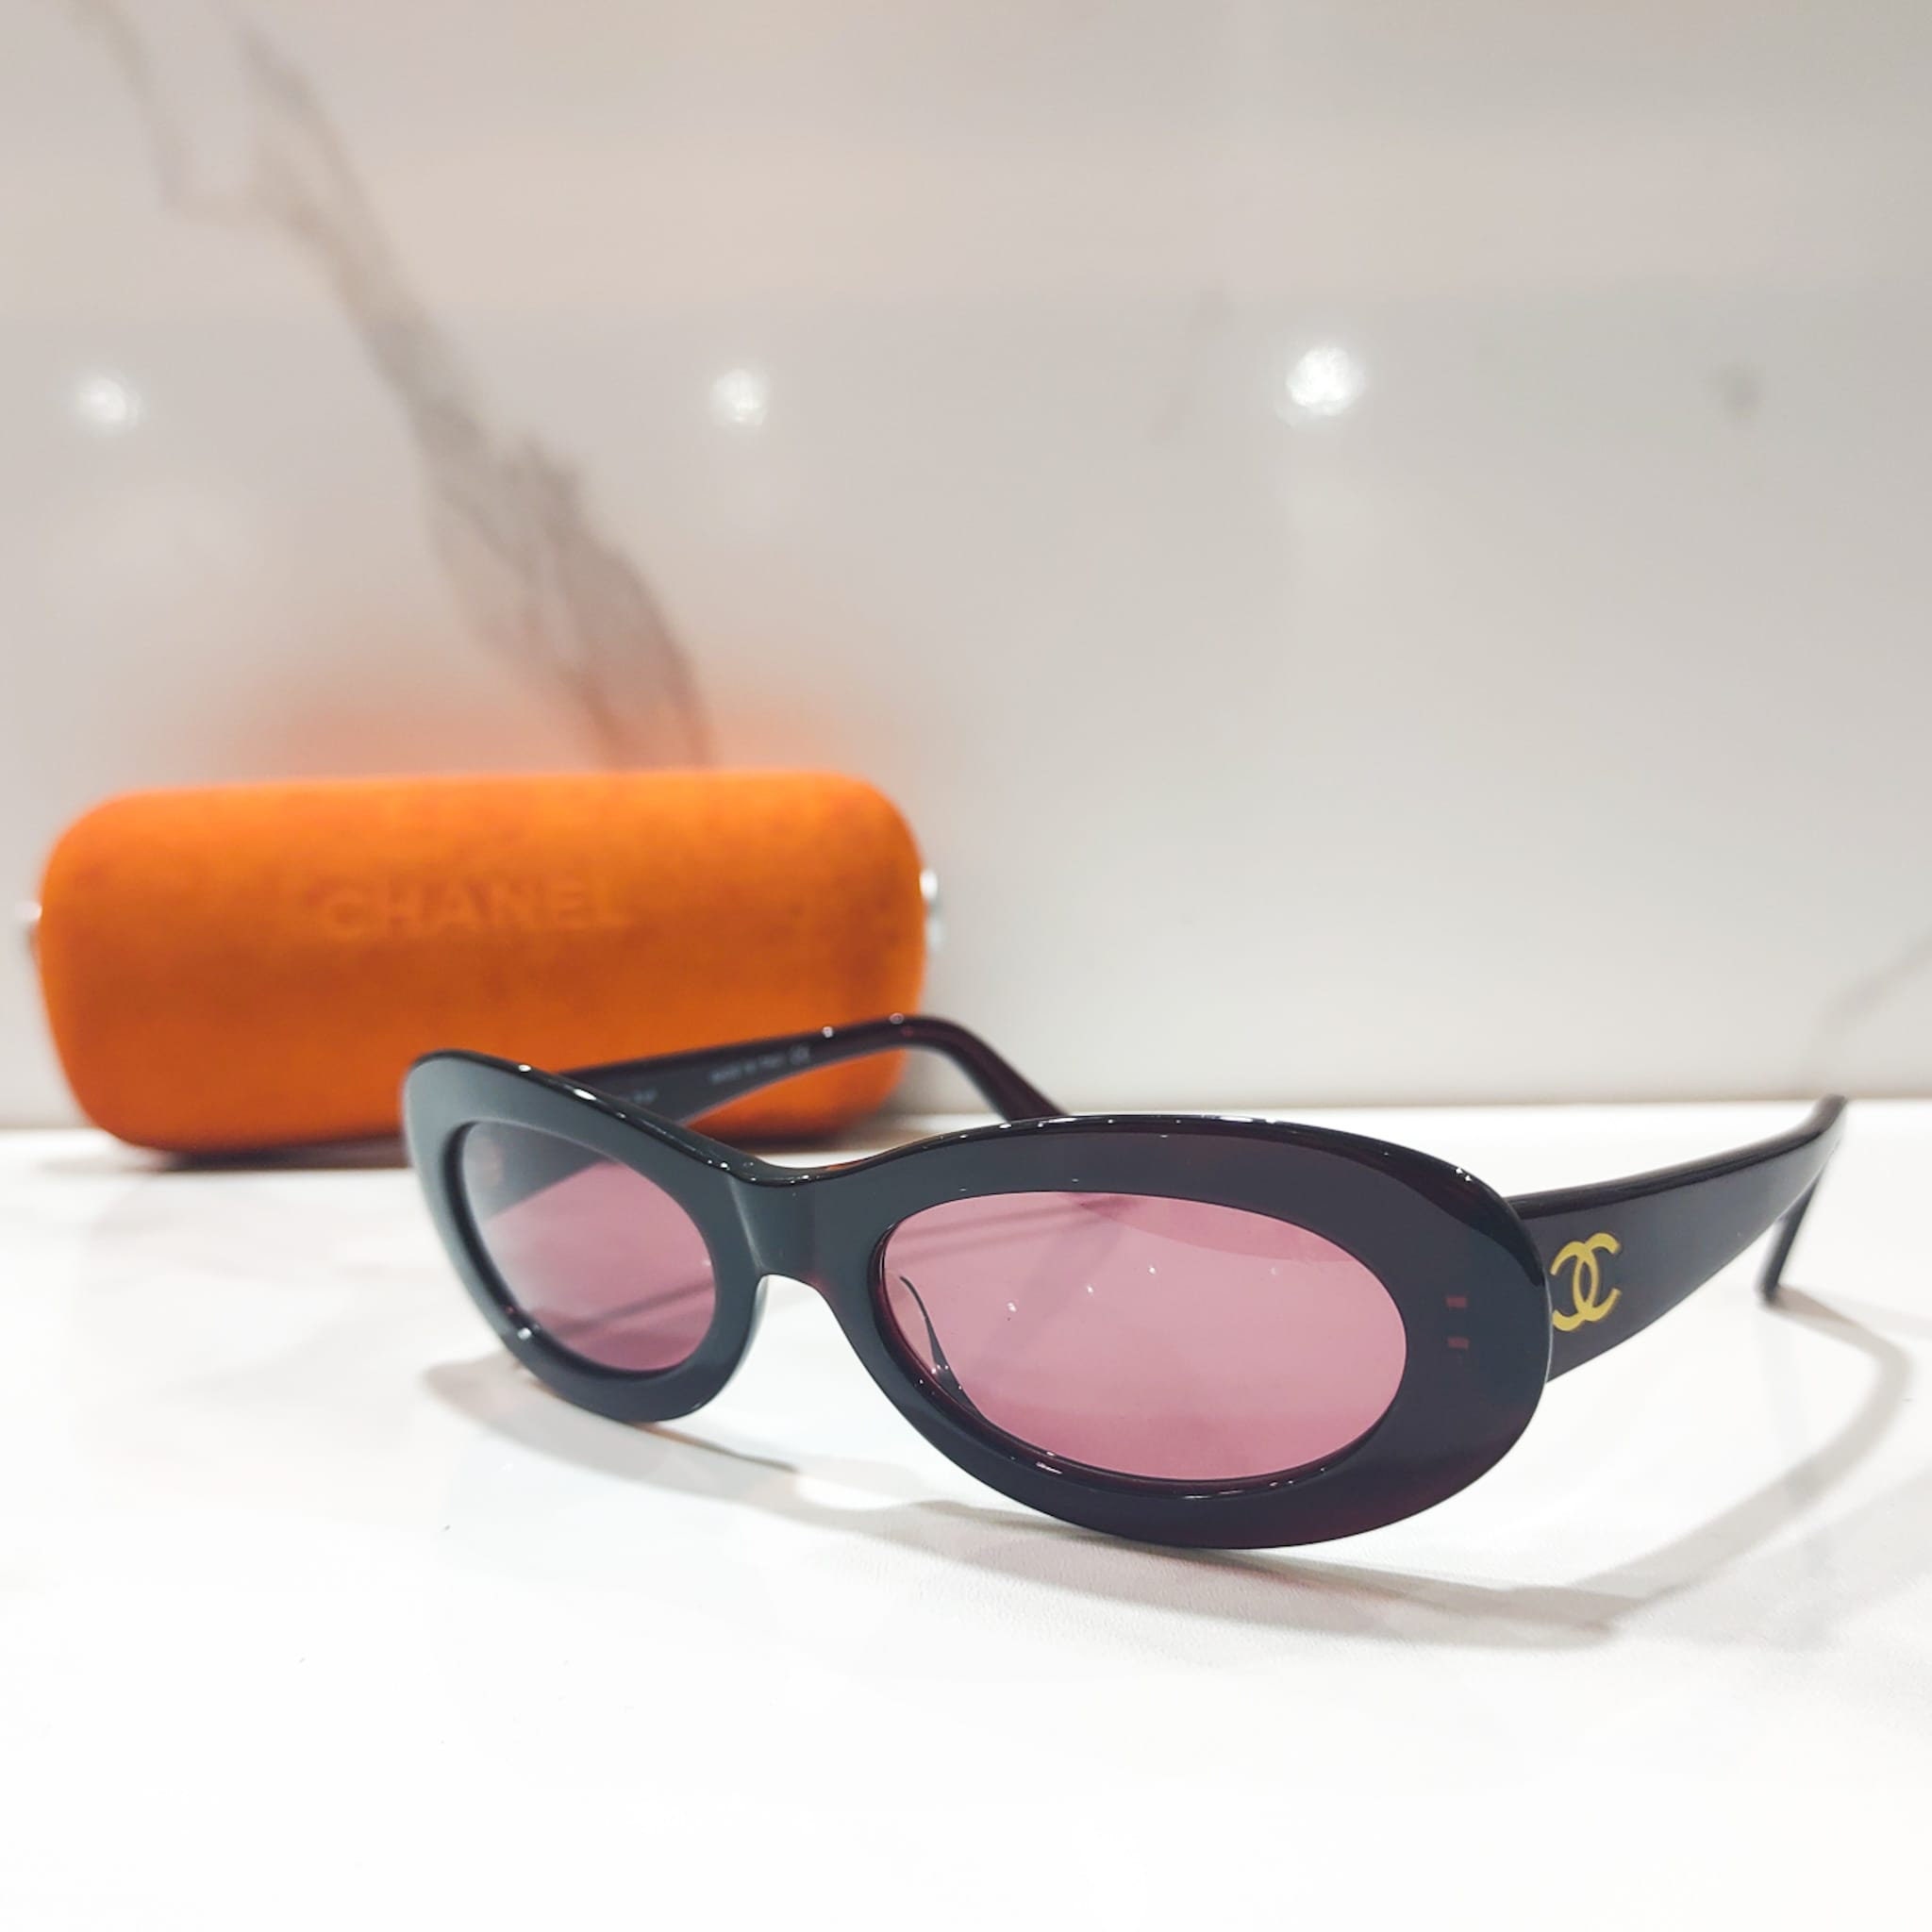 CHANEL, Accessories, Chanel Pink Mirrored Sunglasses